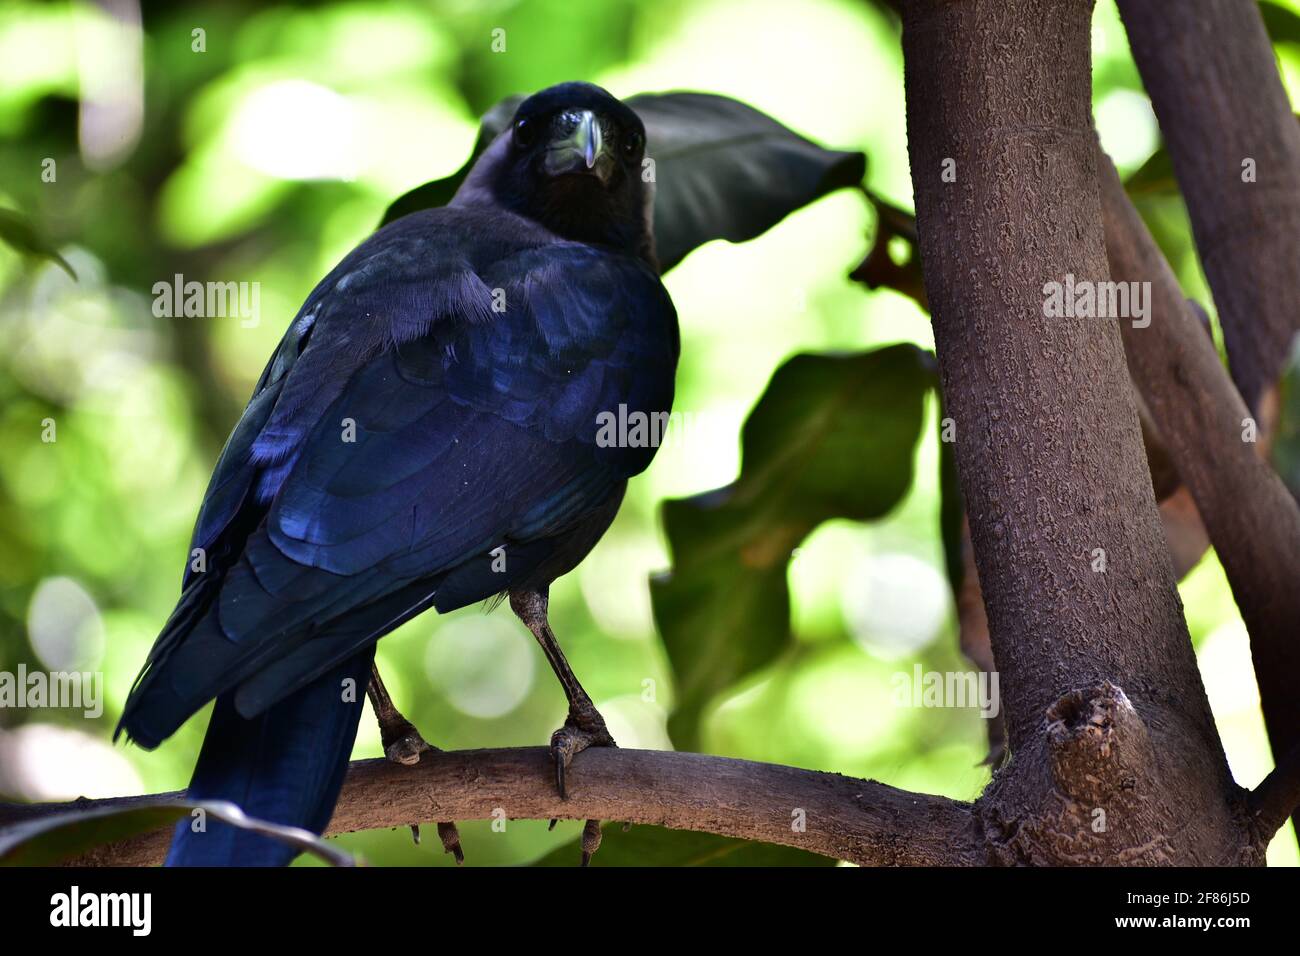 Closeup of an Indian house crow sitting on the branch in jnu campus Stock Photo